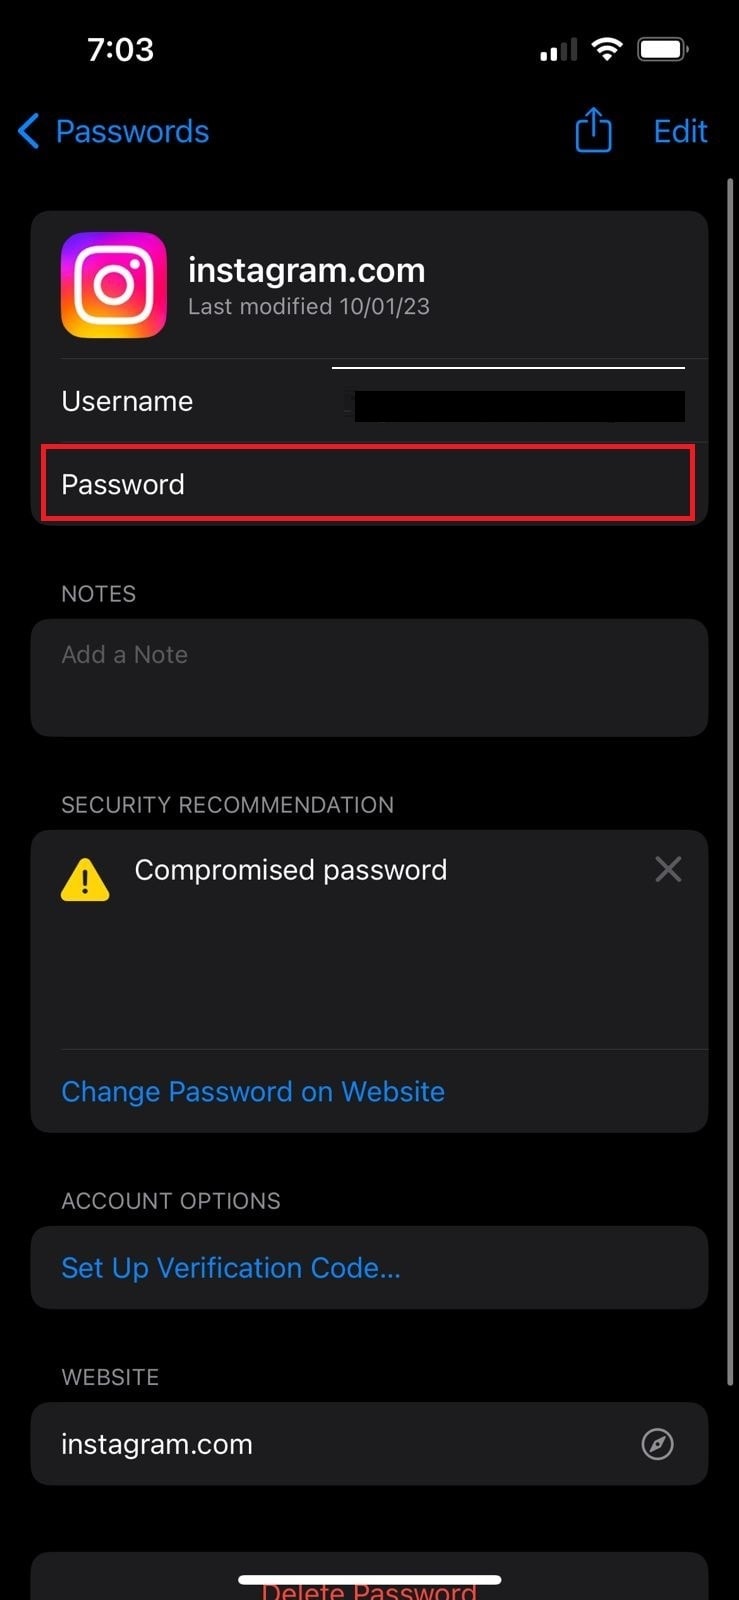 tap-on-the-password-and-you-can-view-your-passwor